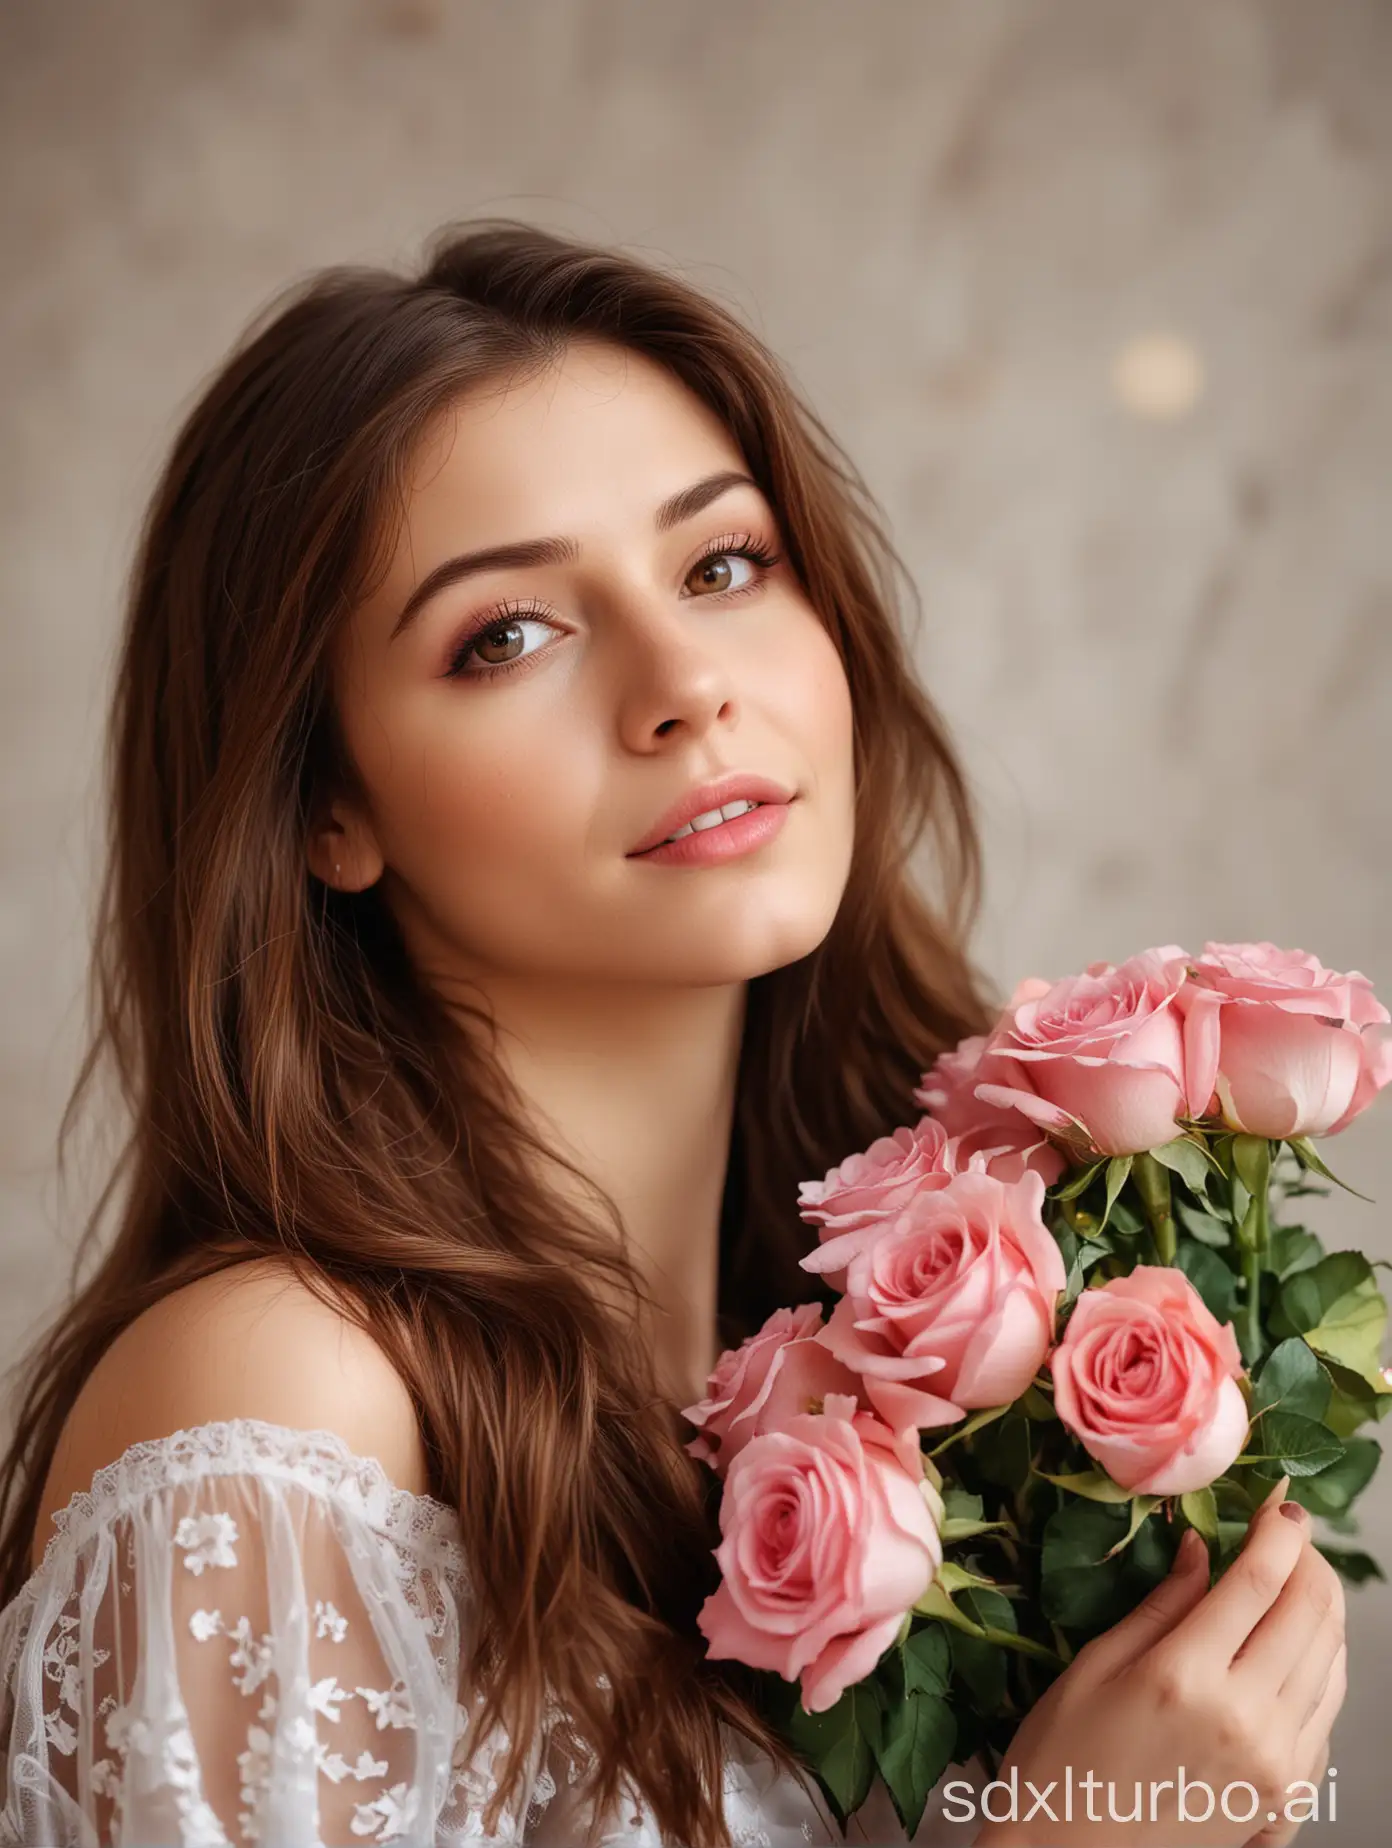 woman, long brown hair, small breast, realistic, photography, holding a bouquet of roses, looking up, background bokeh, close up